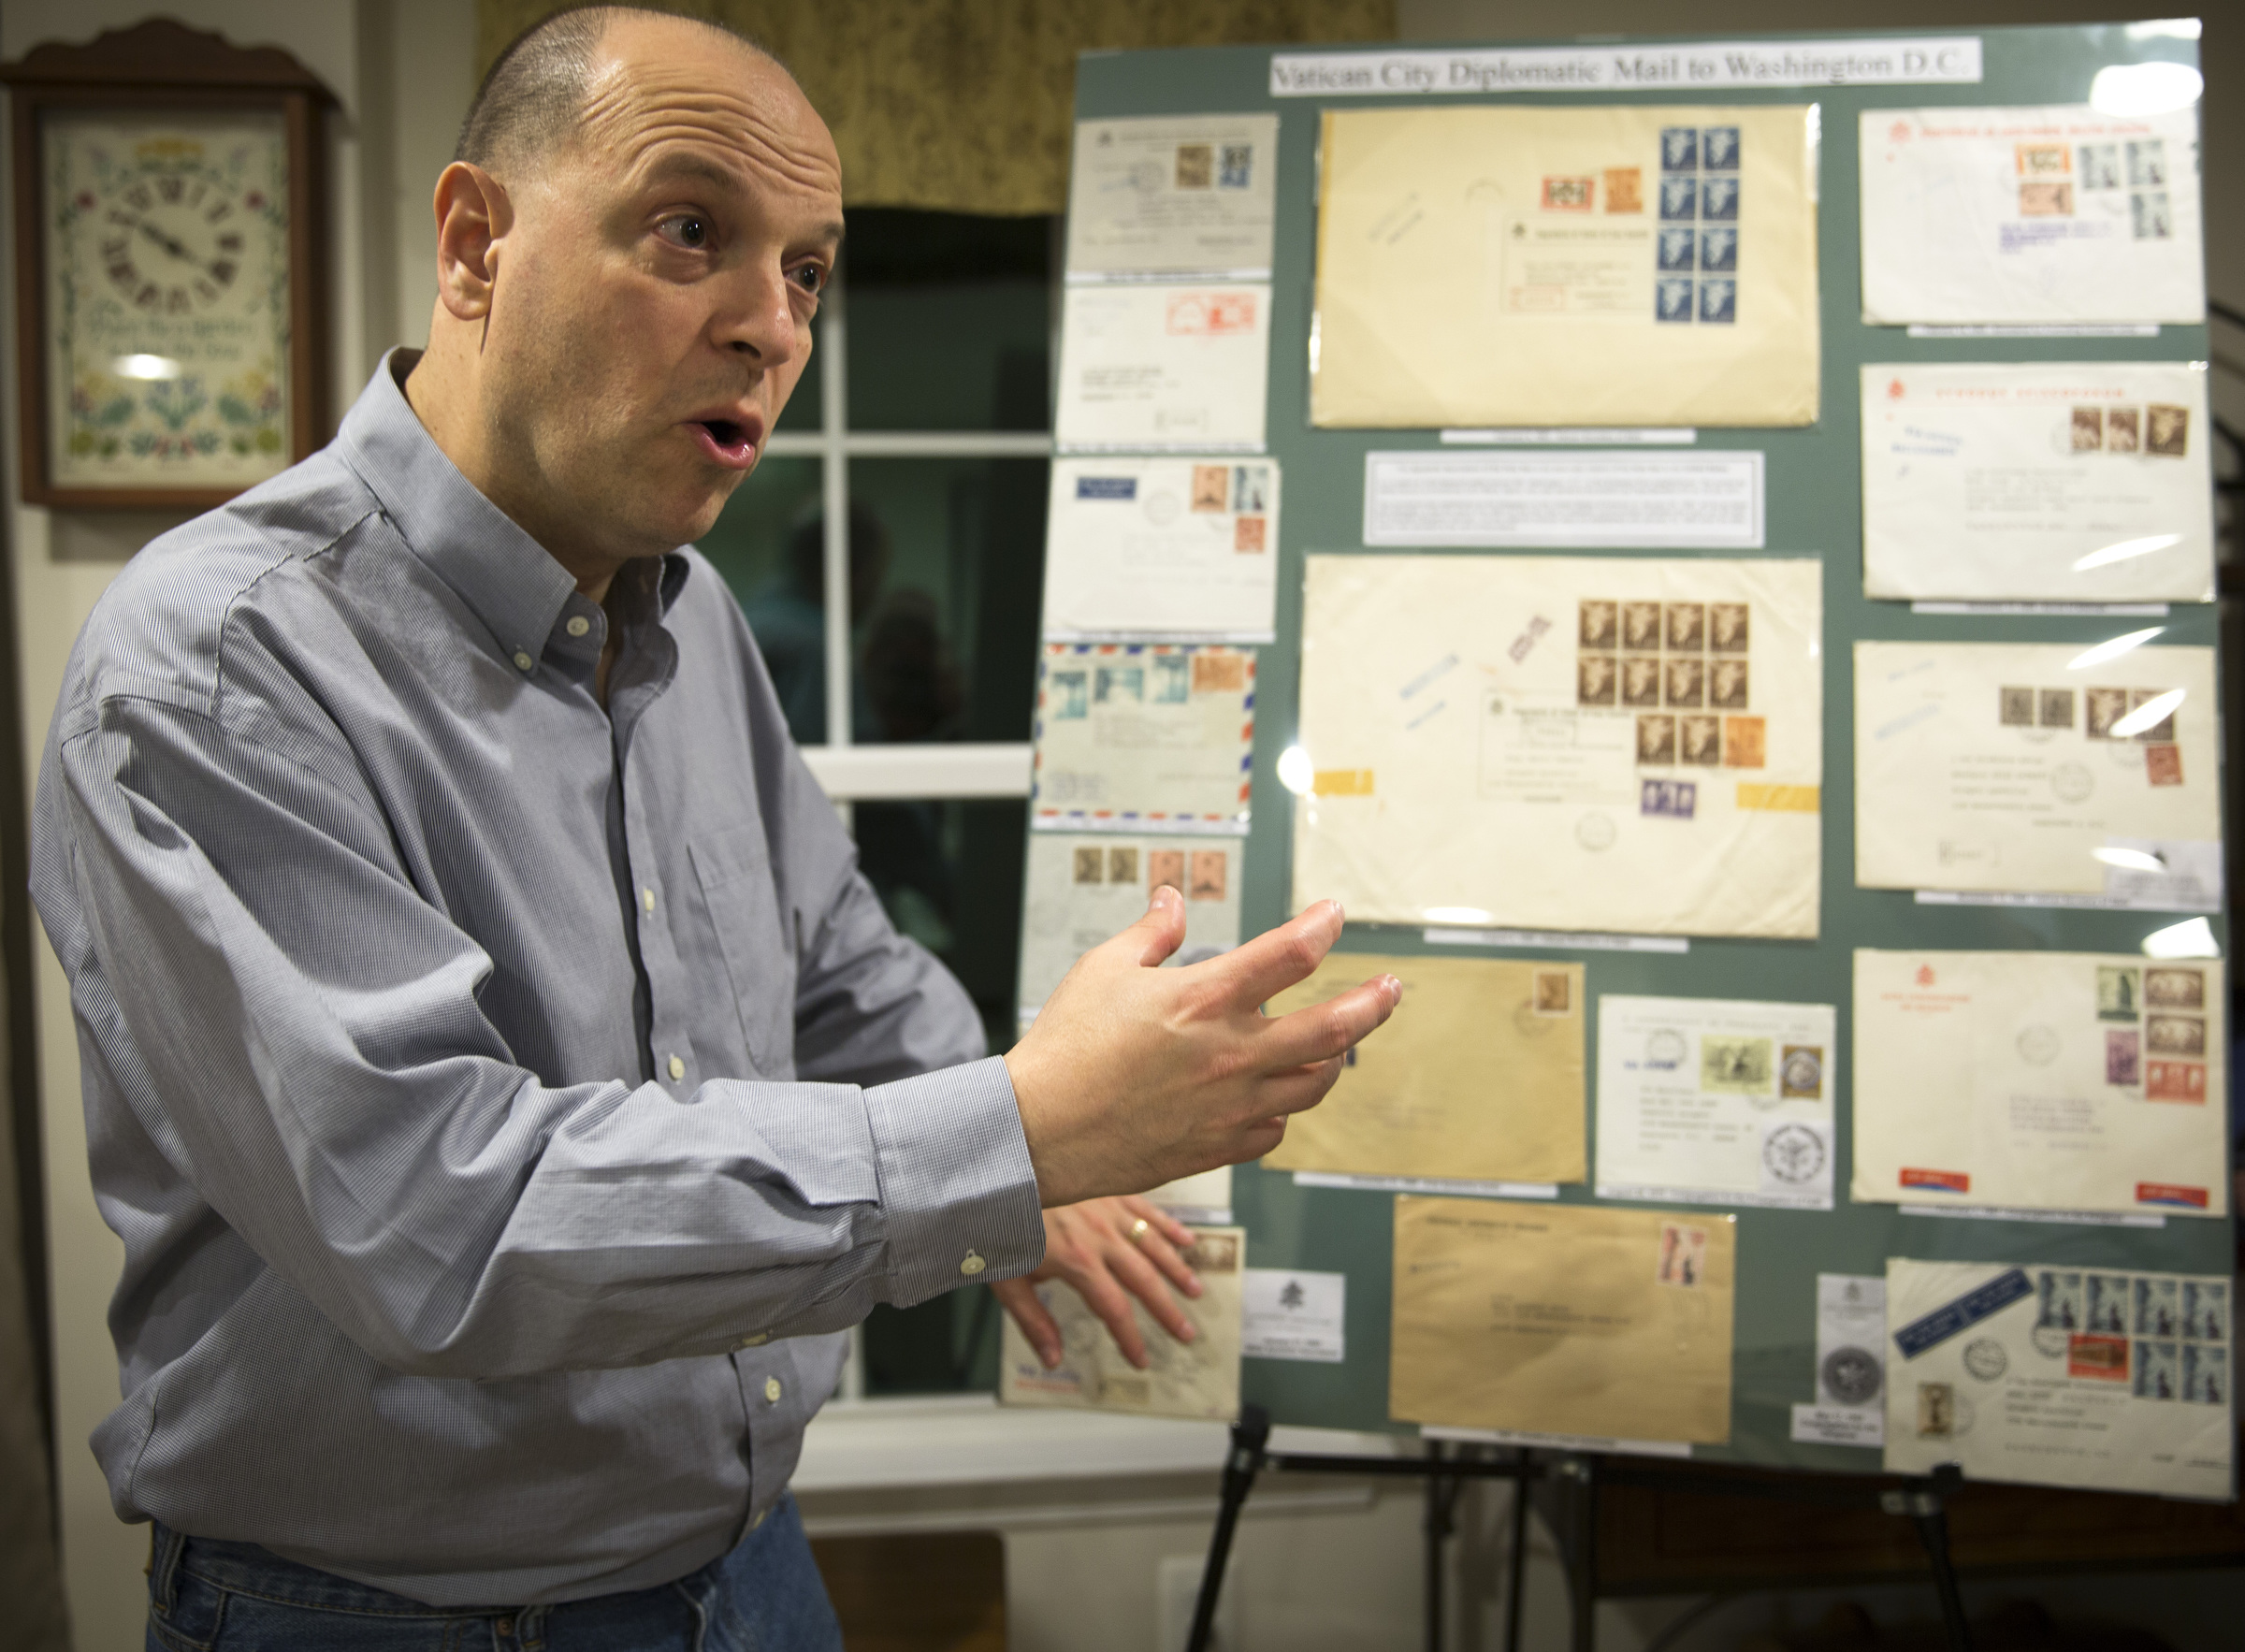 Greg Pirozzi, president of the Vatican Philatelic Society, points out a board displaying some of his Vatican stamps, notes, covers and reference material at his Hanover, Md., home Nov. 1. (CNS photo/Chaz Muth) See VATICAN-PHILATELIC-SOCIETY Nov. 10, 2016.